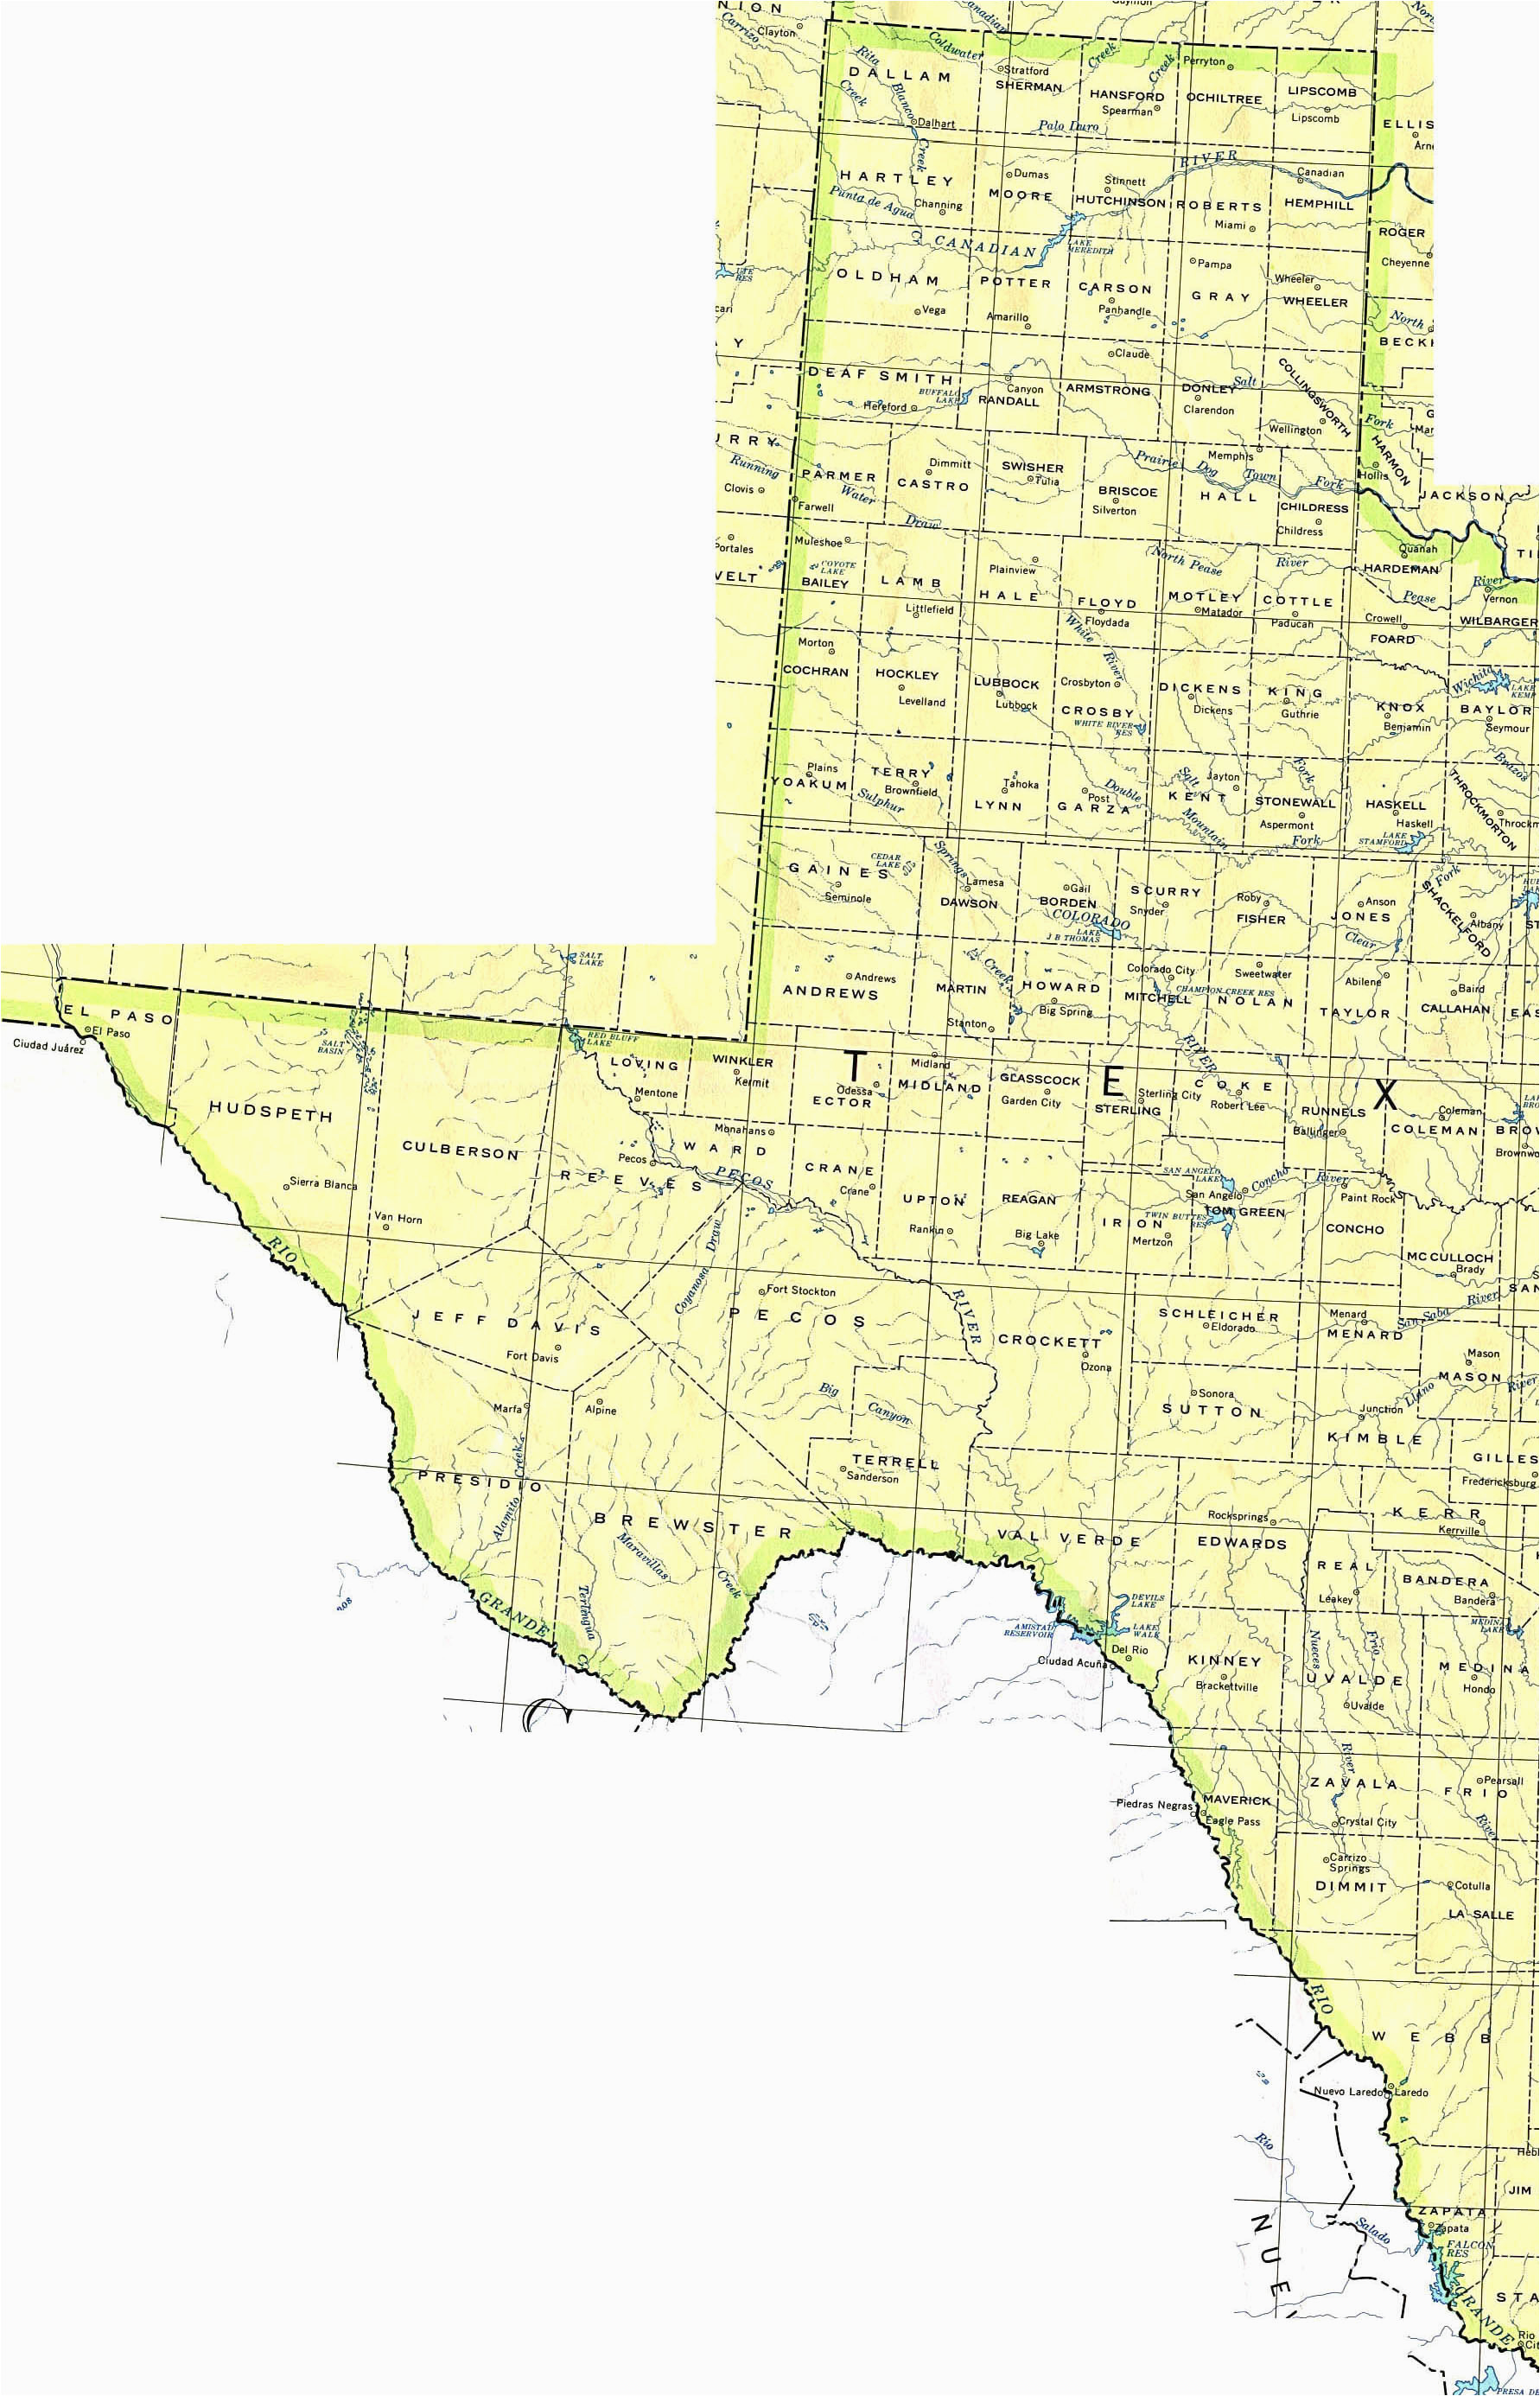 Texas State San Marcos Map West Texas towns Map Business Ideas 2013